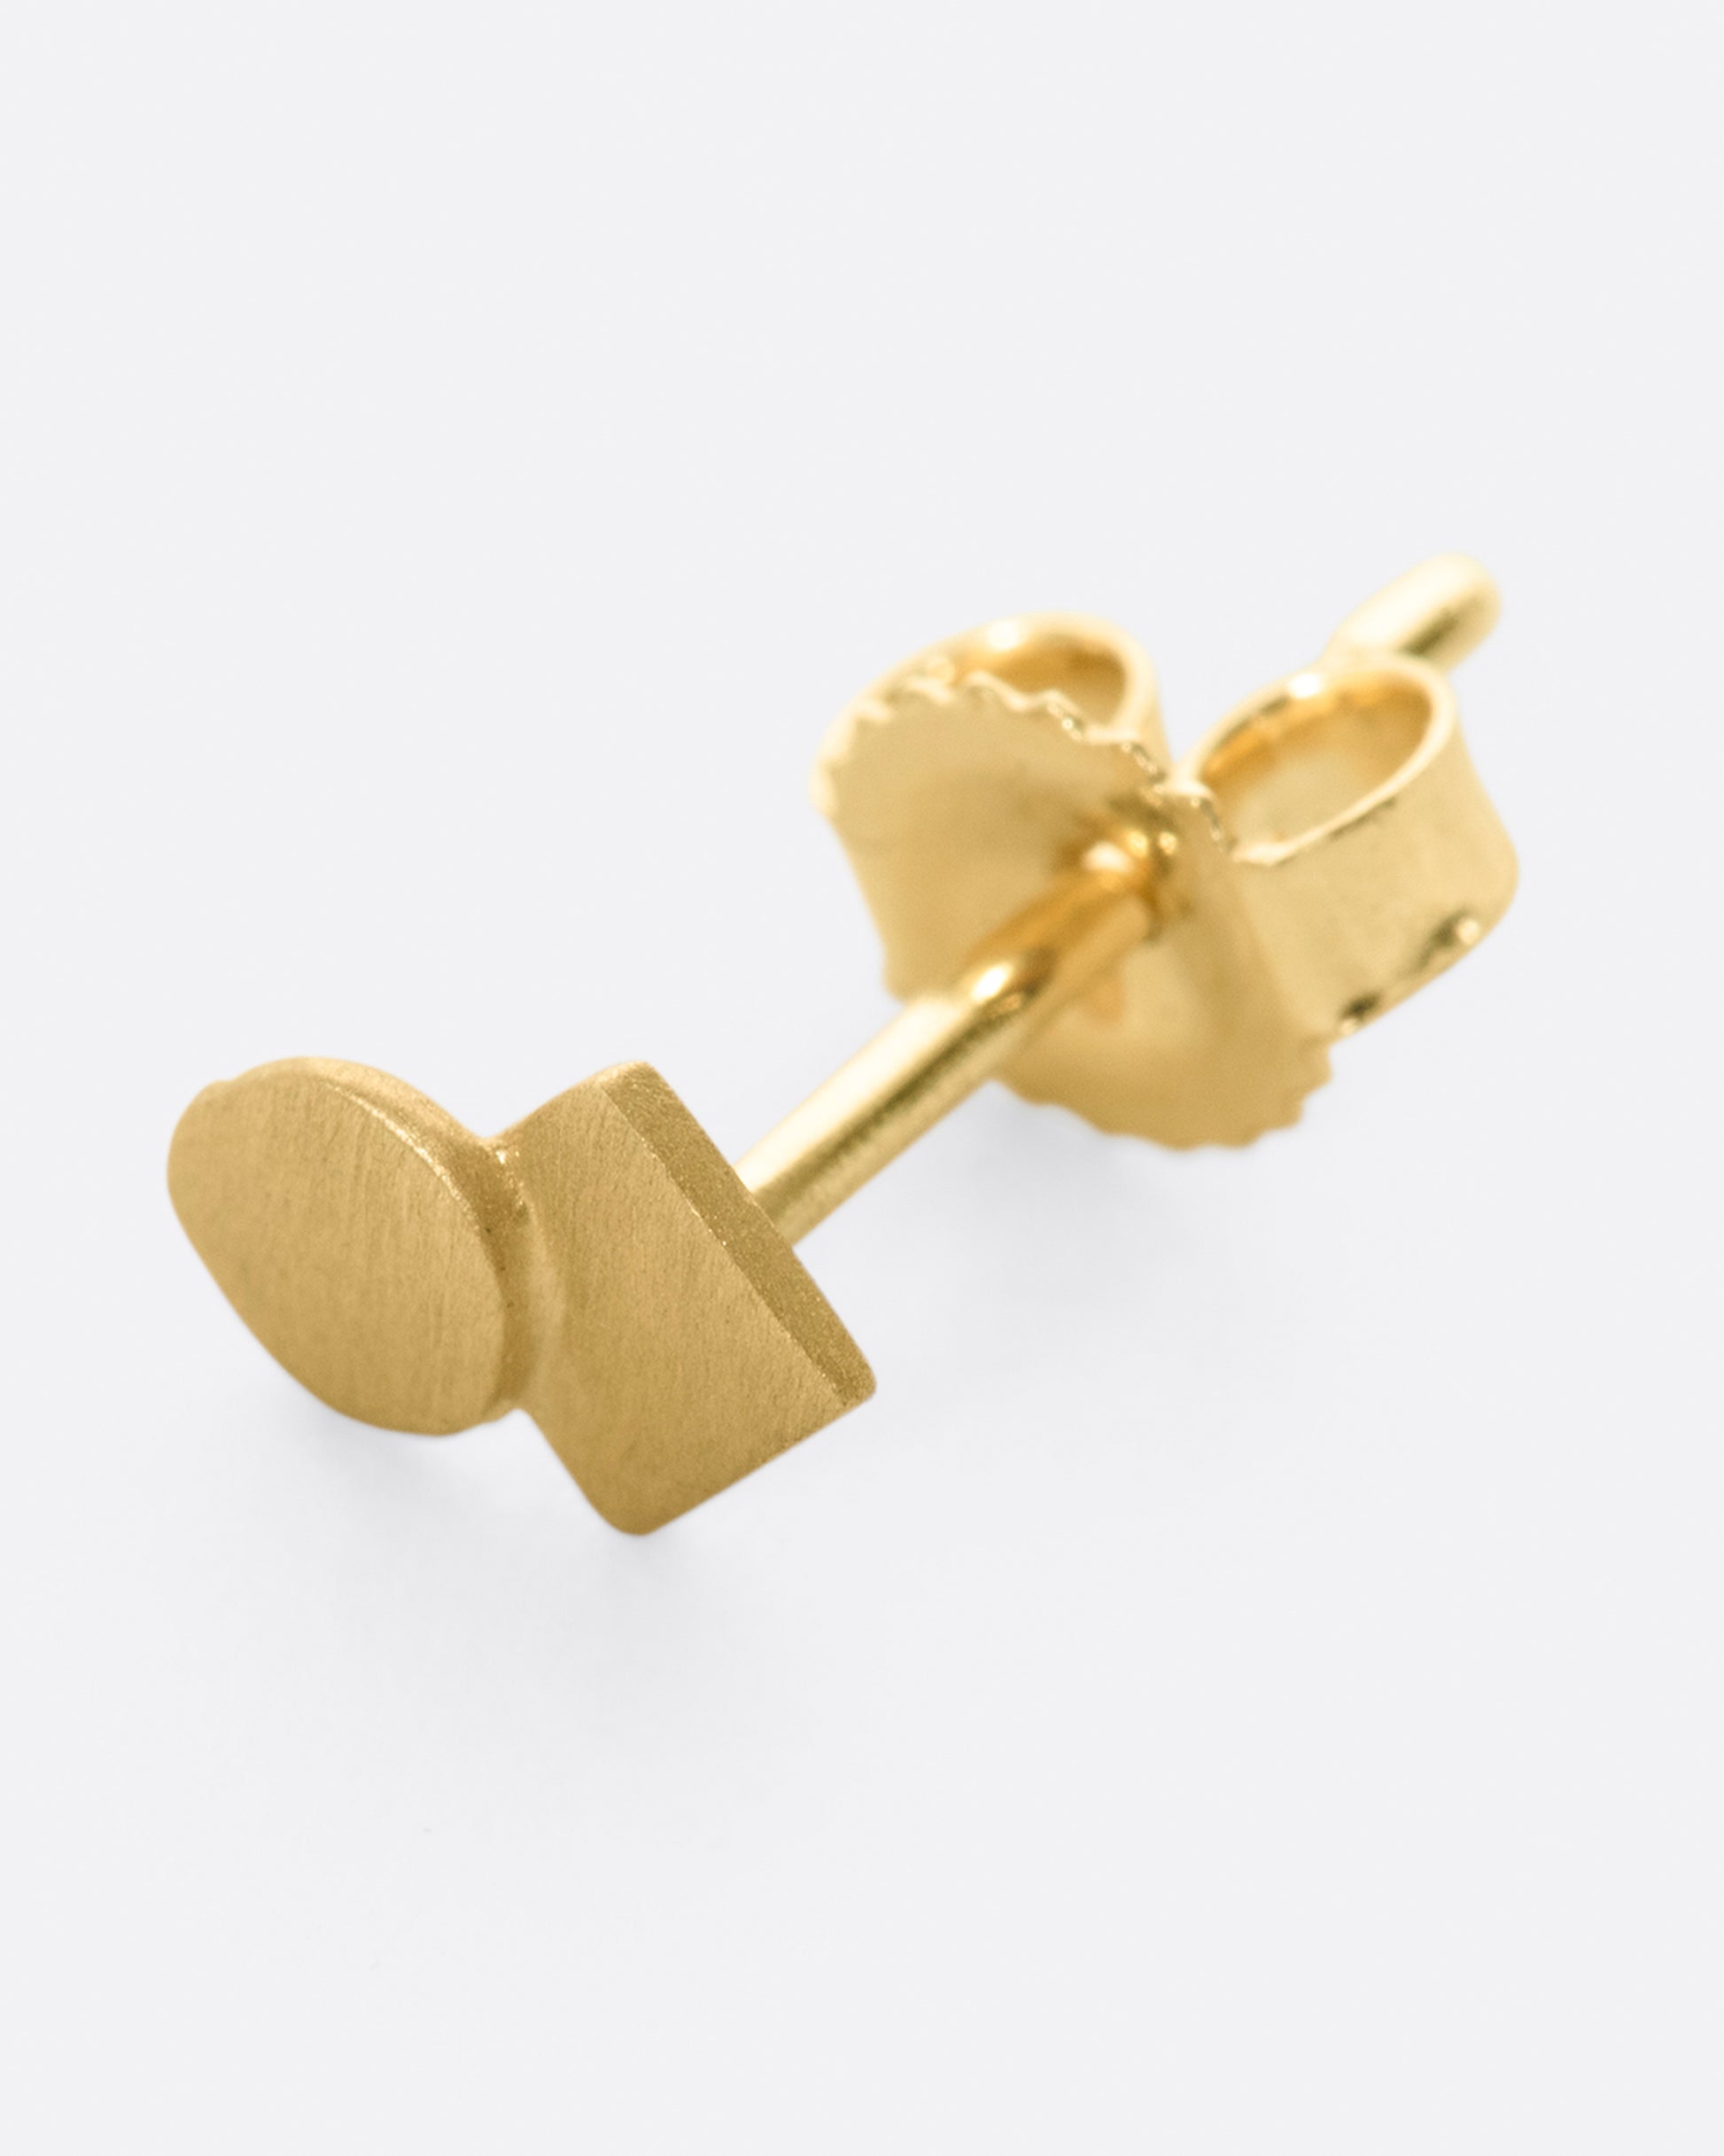 A yellow gold square stud earring with overlapping circle and matte finish.